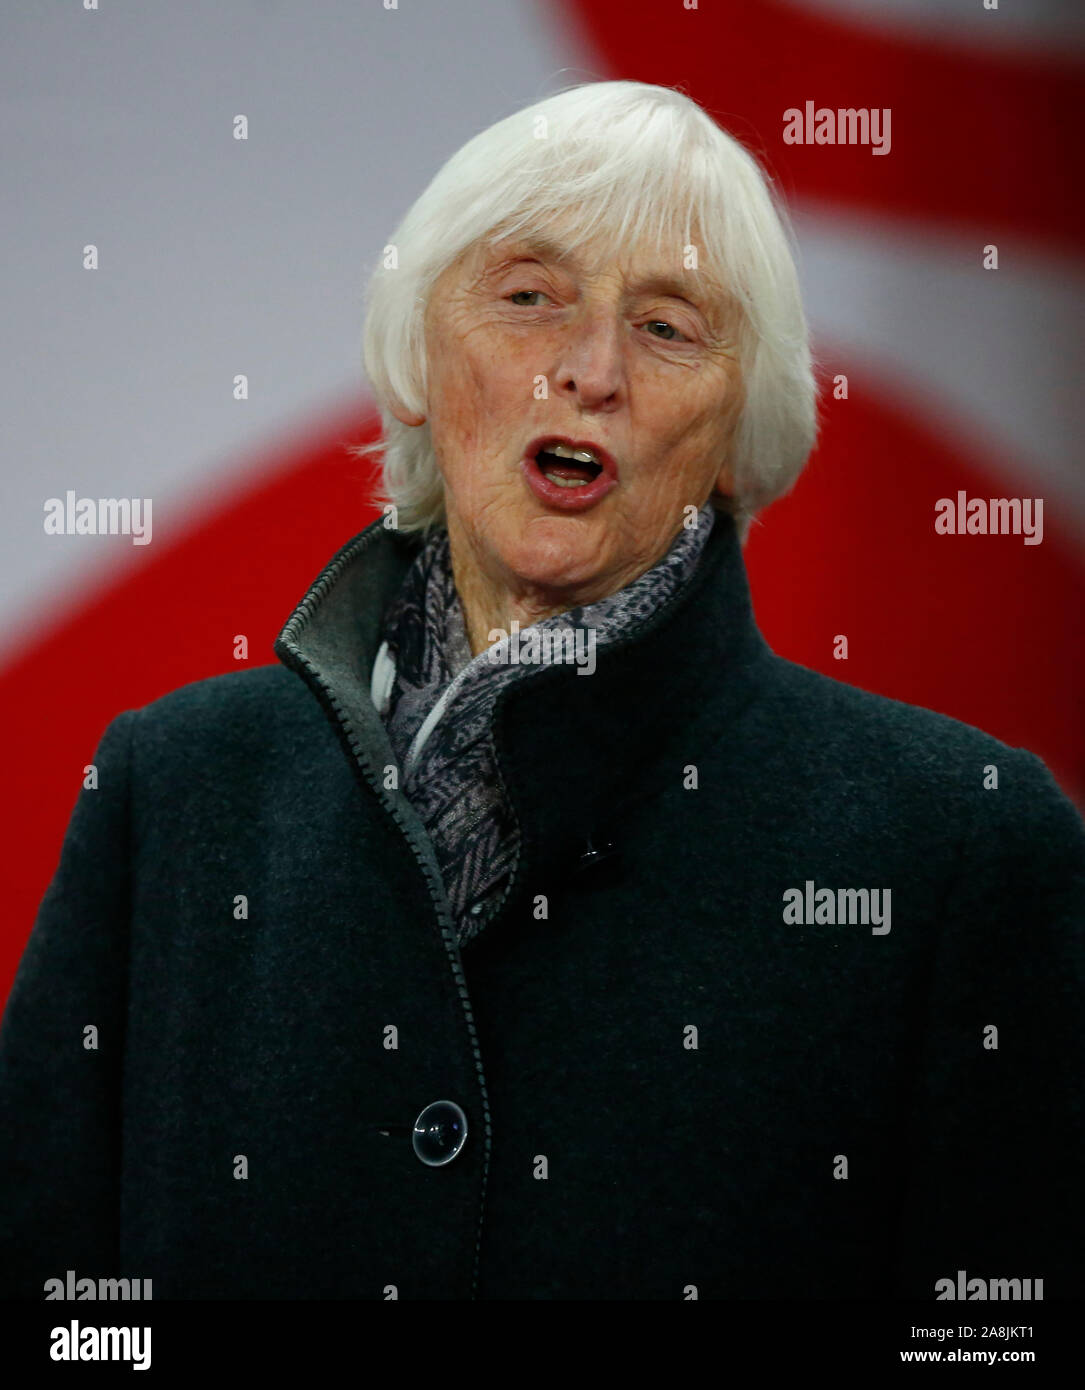 London, UK. 09th Nov, 2019. LONDON, ENGLAND. NOVEMBER 09: Sue Campbell Head of Women's Football during Women's International Friendly between England Women and Germany Women at Wembley stadium in London, England on November 09, 2019 Credit: Action Foto Sport/Alamy Live News Stock Photo